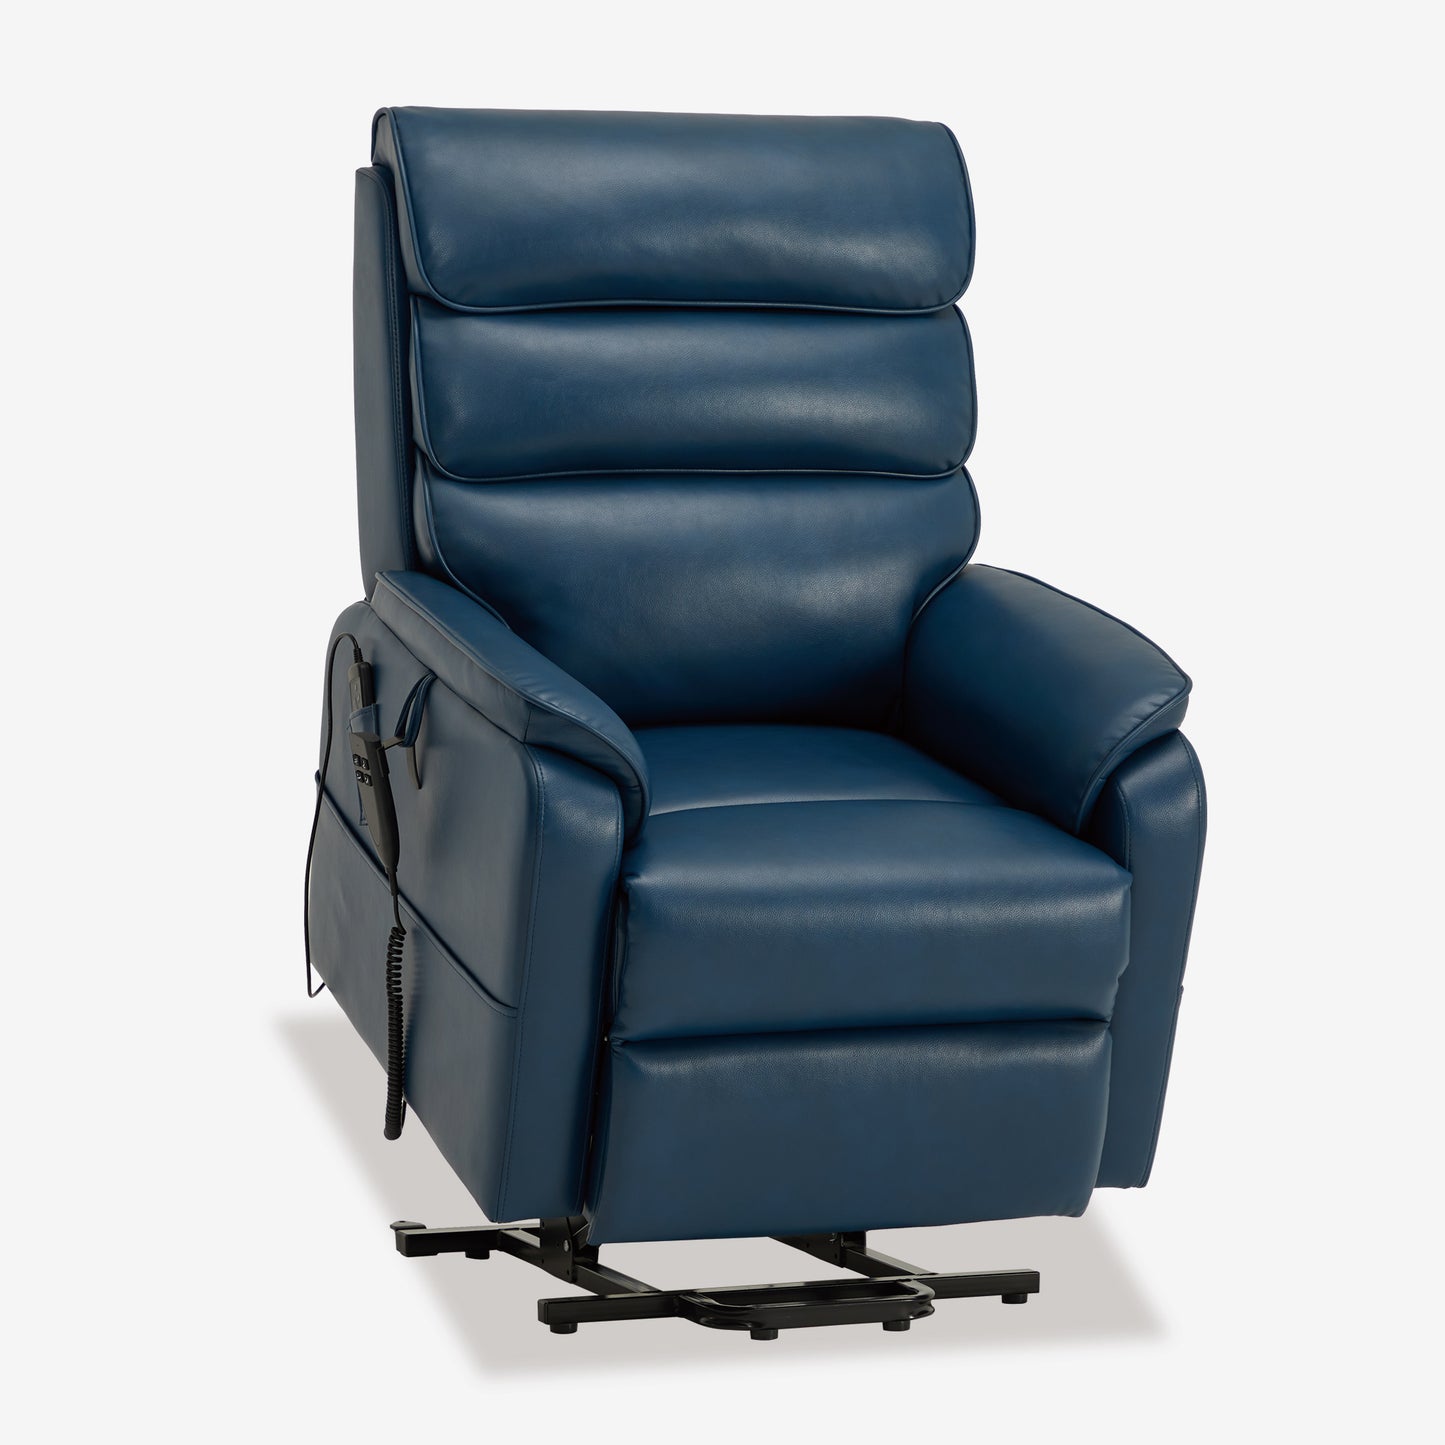 Reclining Chair That Lays Flat With Heat Massage Infinite Positions